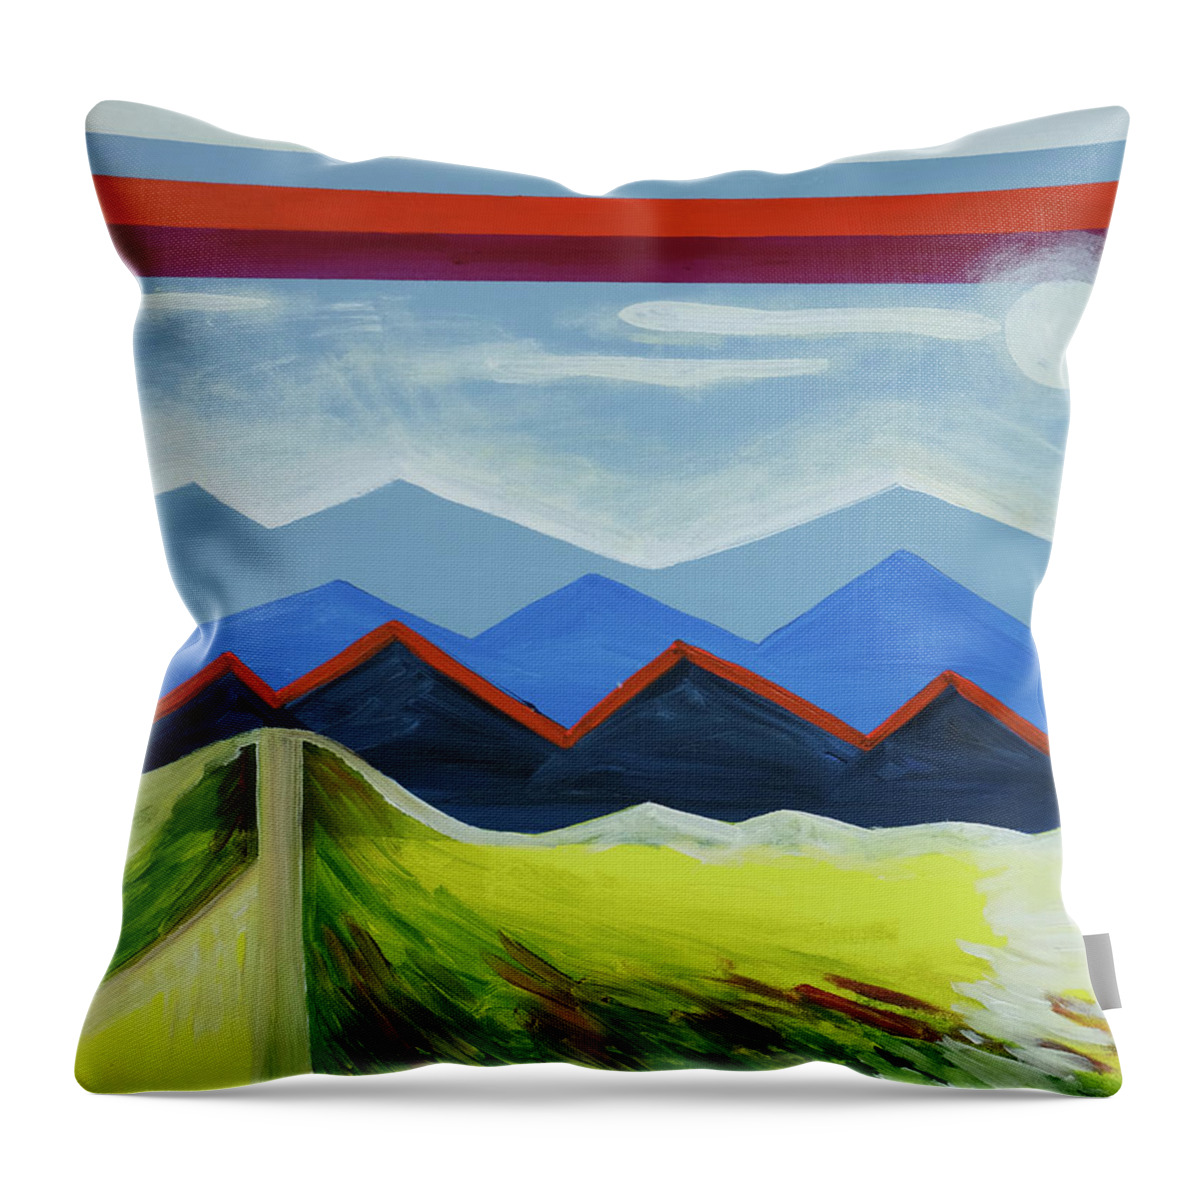 Blue Ridge Mountains Throw Pillow featuring the painting Ridge by Laura Hol Art